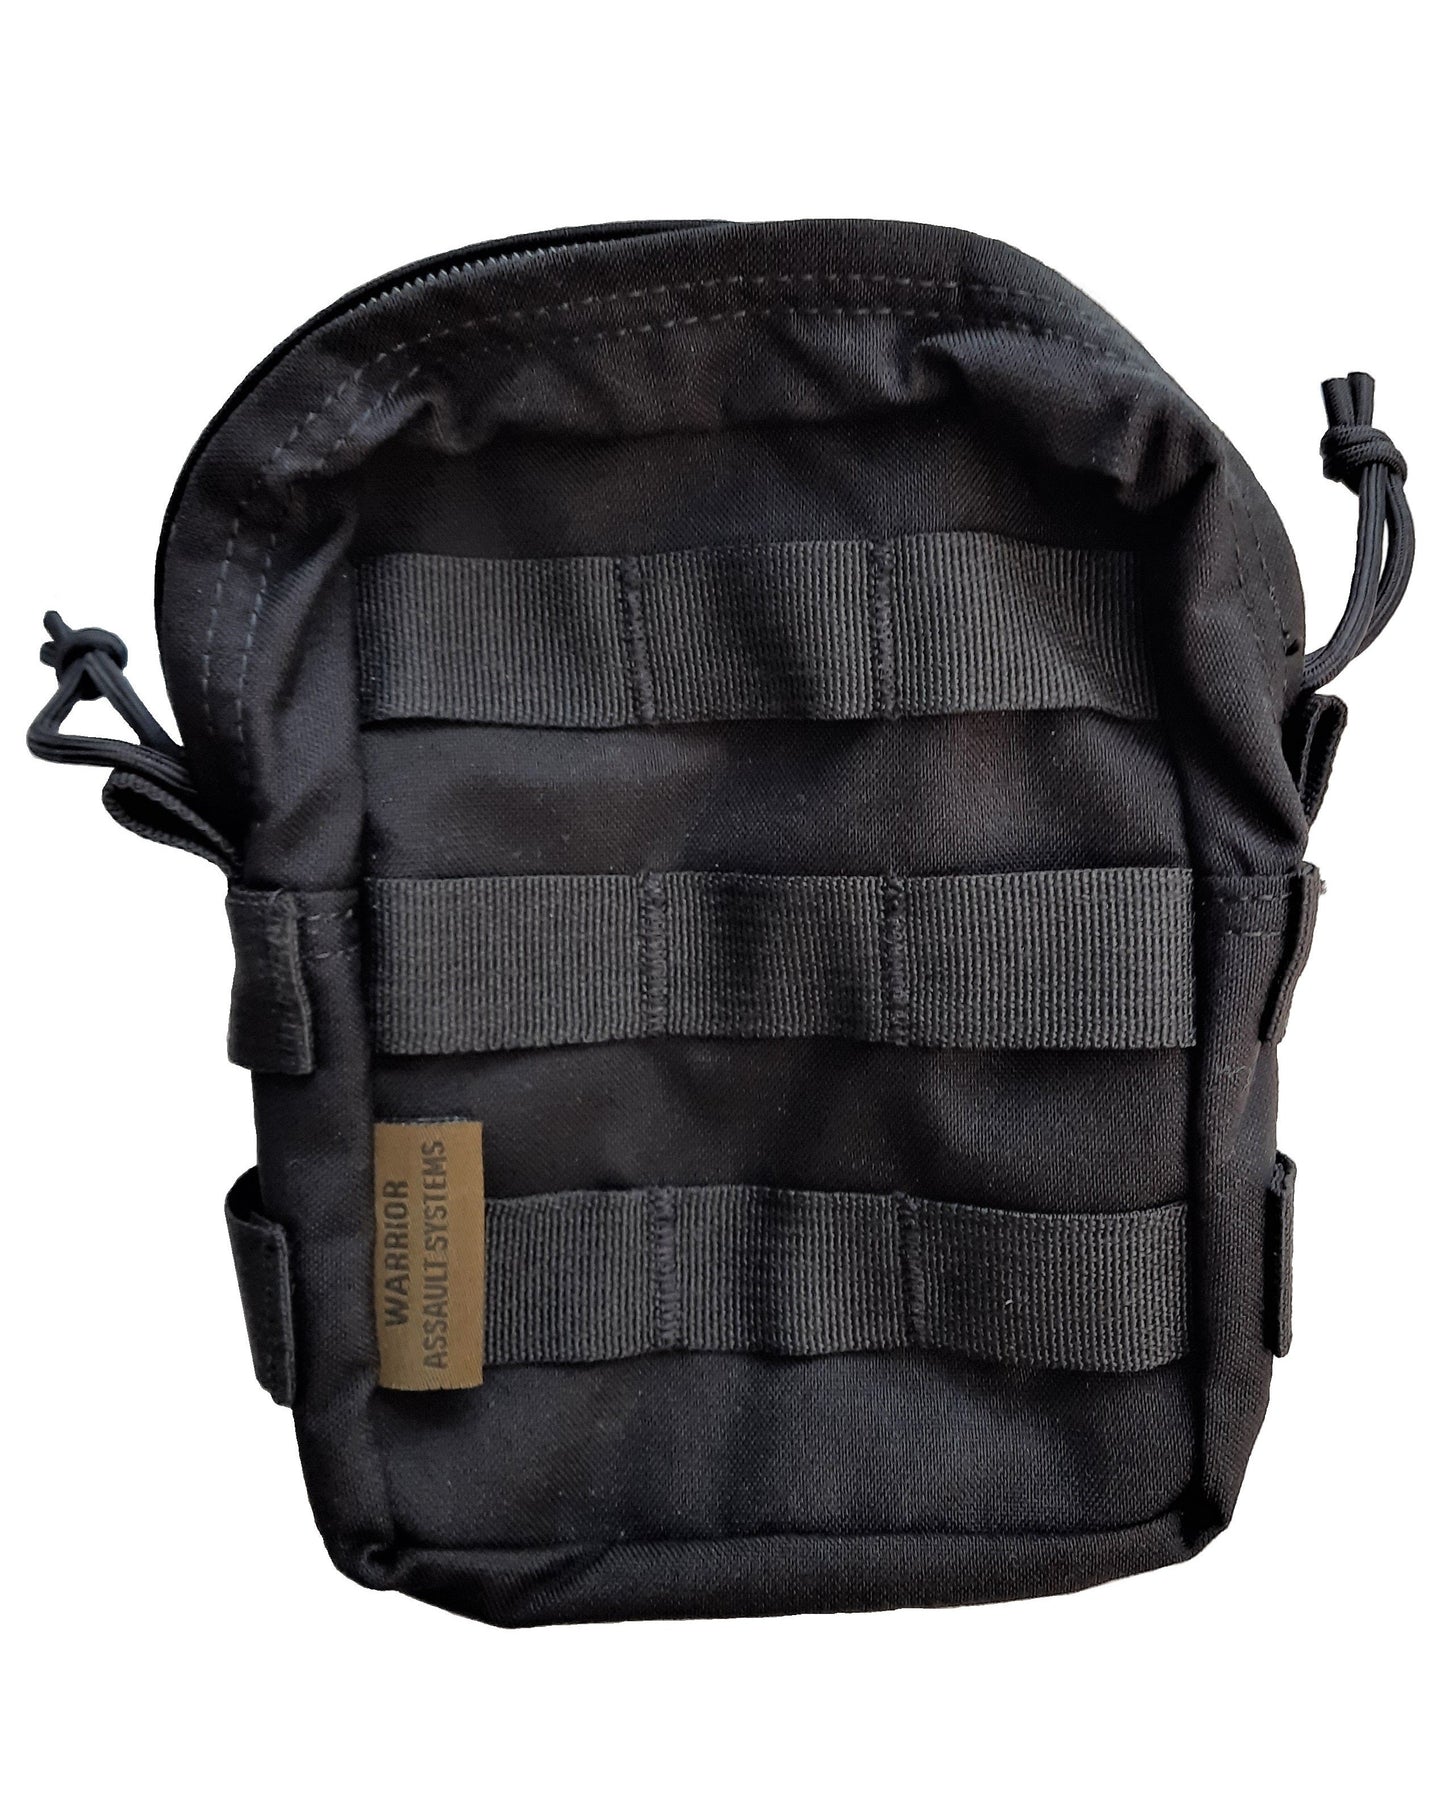 <tc>Warrior small Molle utility or medical pouch black</tc>